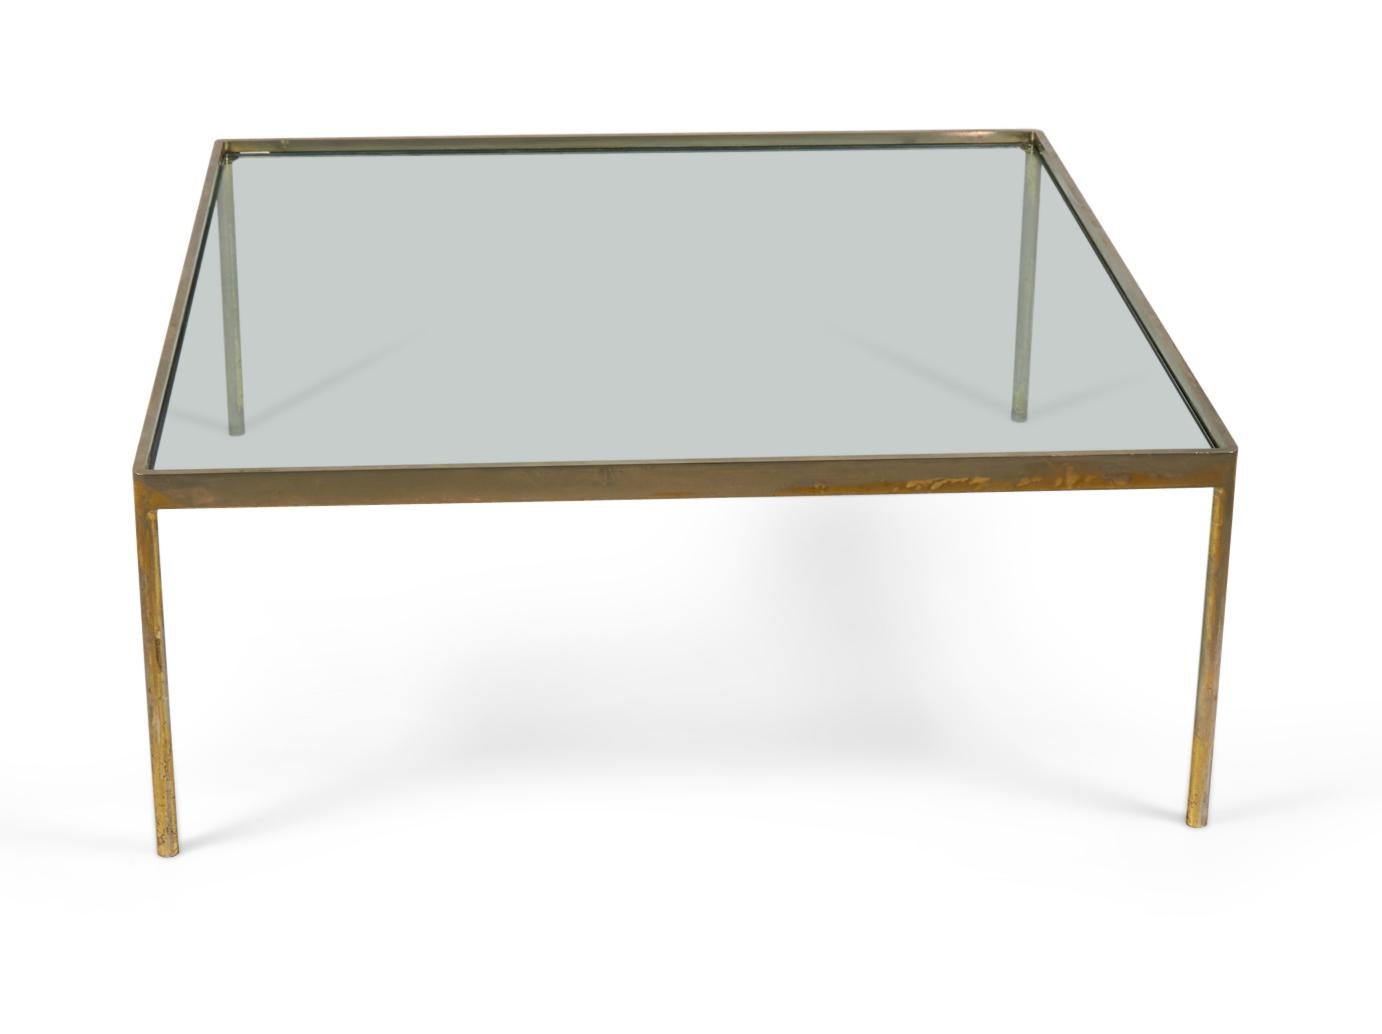 American International Style (circa 1960) square polished nickel coffee / cocktail table frame with an inset glass top. (KIBREL S. TERRY FOR SCOPE)
